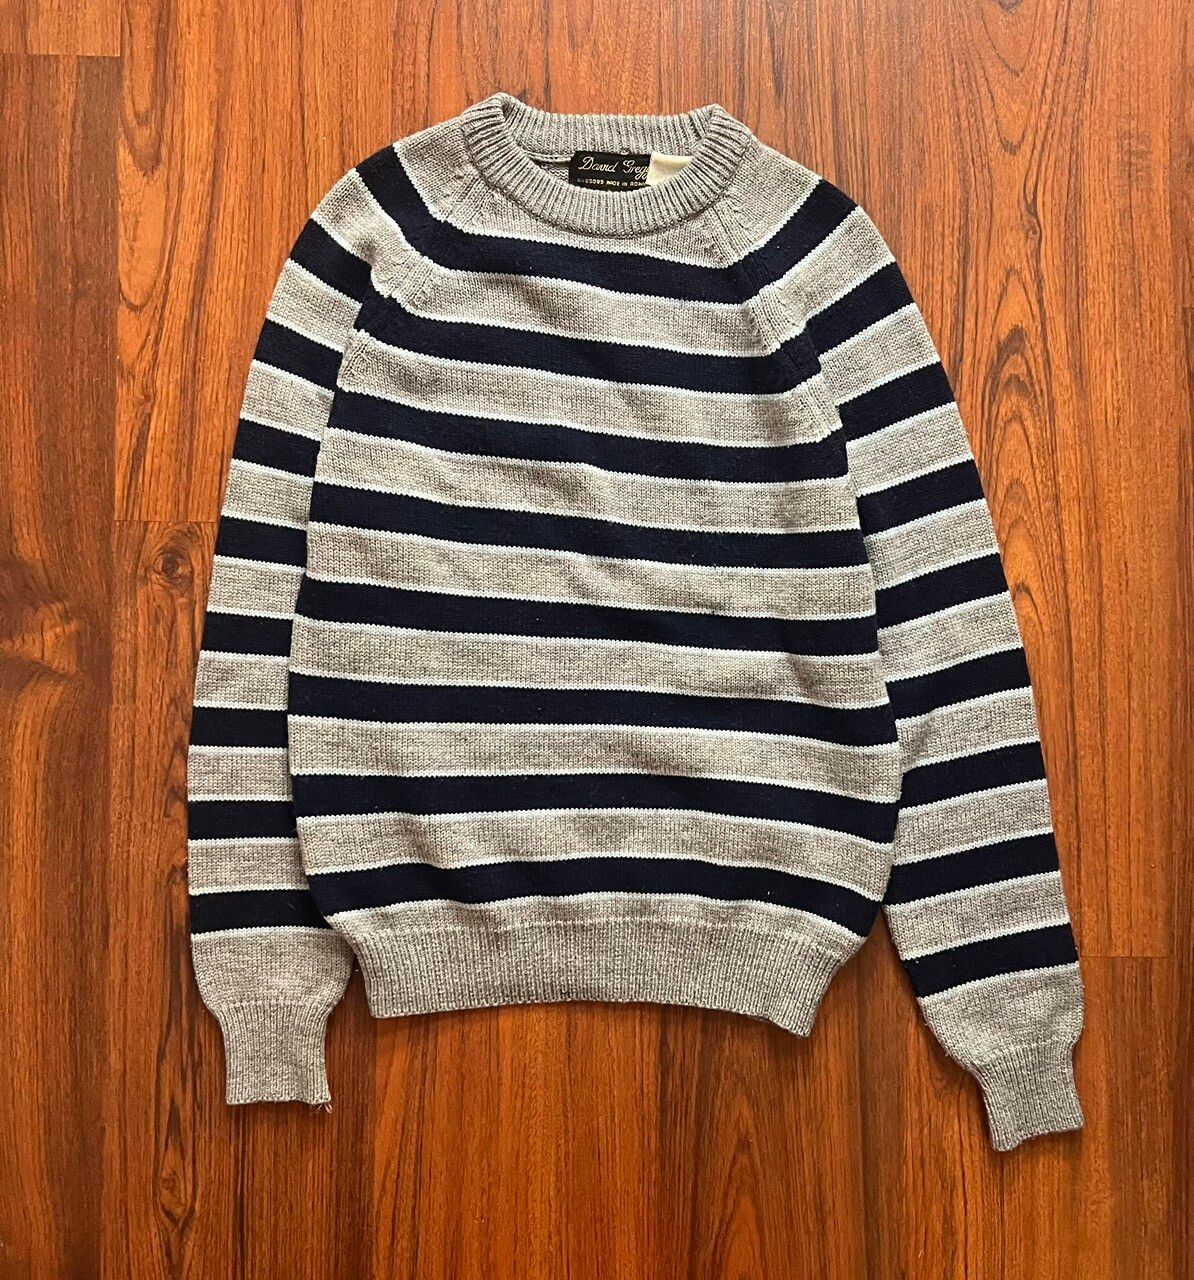 Vintage Vintage 80s David Gregg Wool Striped Sweater Romanian Made Size US M / EU 48-50 / 2 - 1 Preview